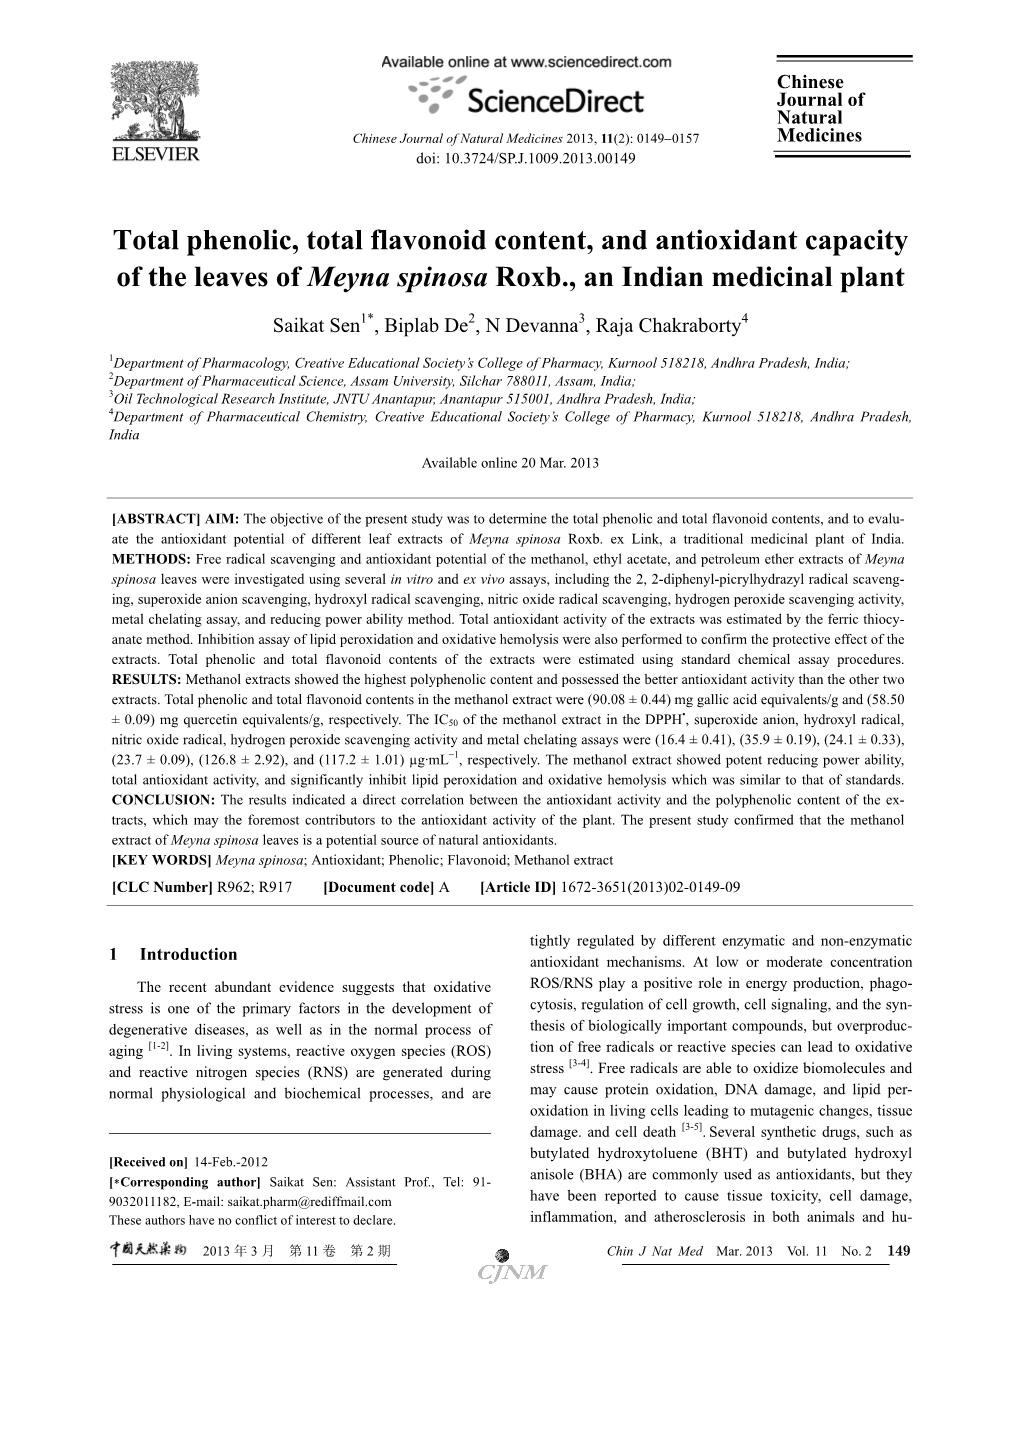 Total Phenolic, Total Flavonoid Content, and Antioxidant Capacity of the Leaves of Meyna Spinosa Roxb., an Indian Medicinal Plant